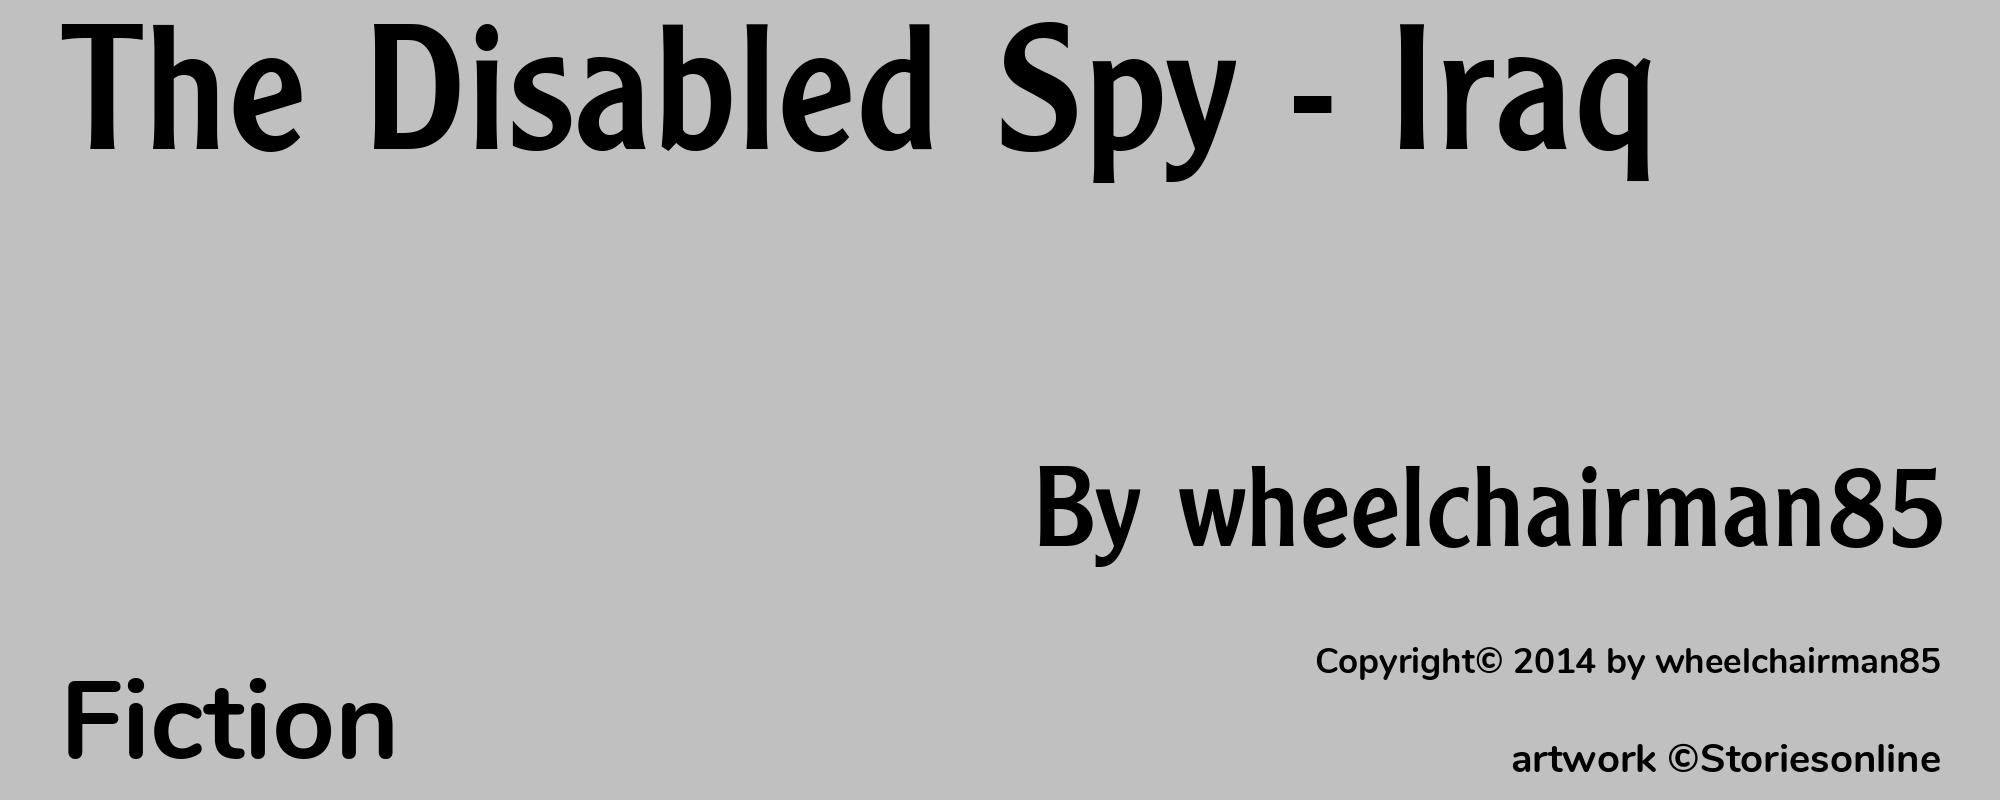 The Disabled Spy - Iraq - Cover